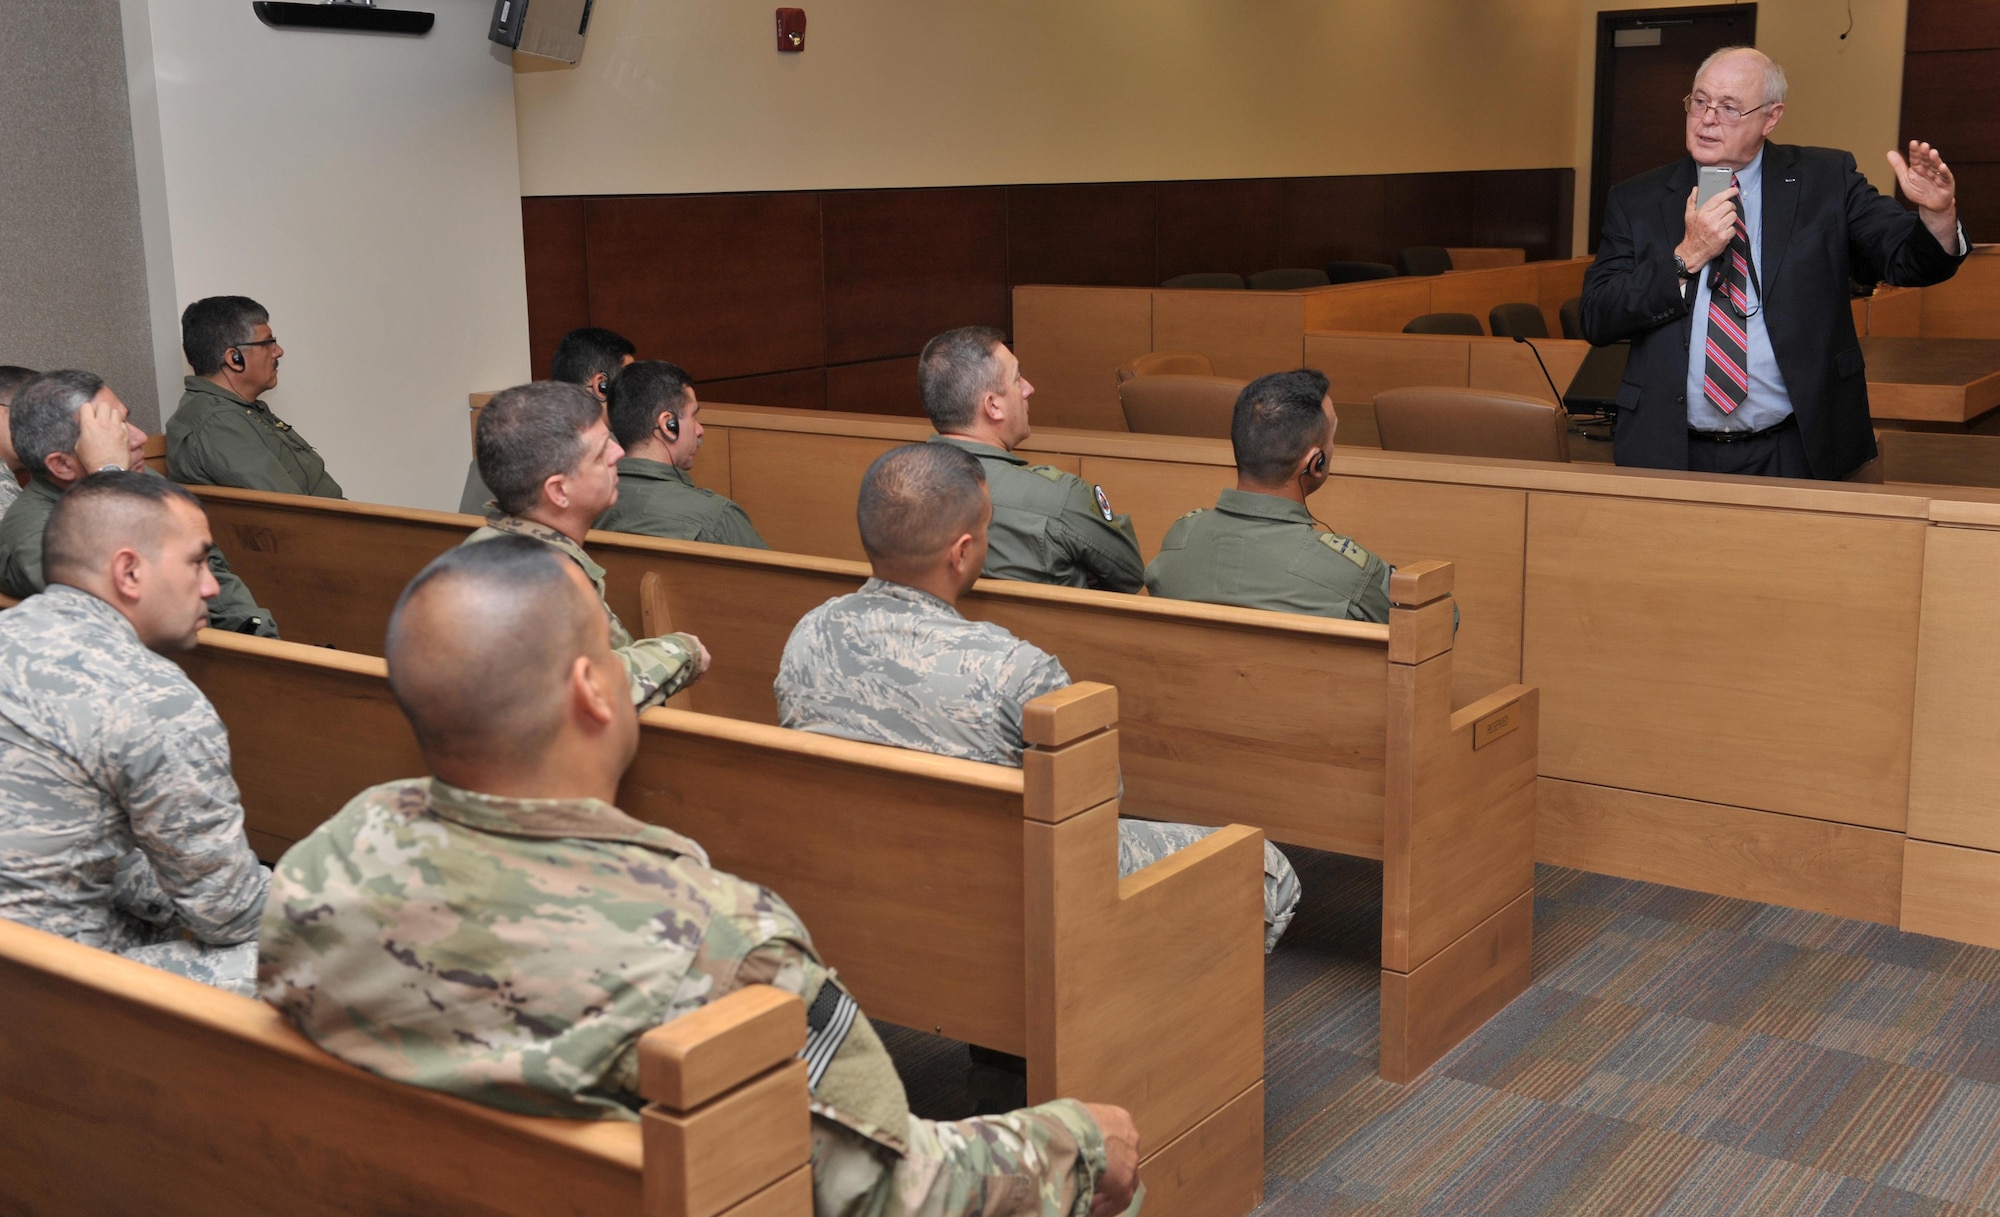 Judge Patt Maney, the county judge for Okaloosa County Court of Florida, explains the U.S. justice system to Building Partnership Aviation Capacity Seminar attendees at Ft. Walton Beach, Fla.,July 19, 2016. BPACS is a two-week long event, held four times a year, which brings aviation-minded foreign military personnel together with U.S. civilains and military membbers to learn about aviation enterprise and security. (U.S. Air Force photo by Staff Sgt. Kentavist P. Brackin)